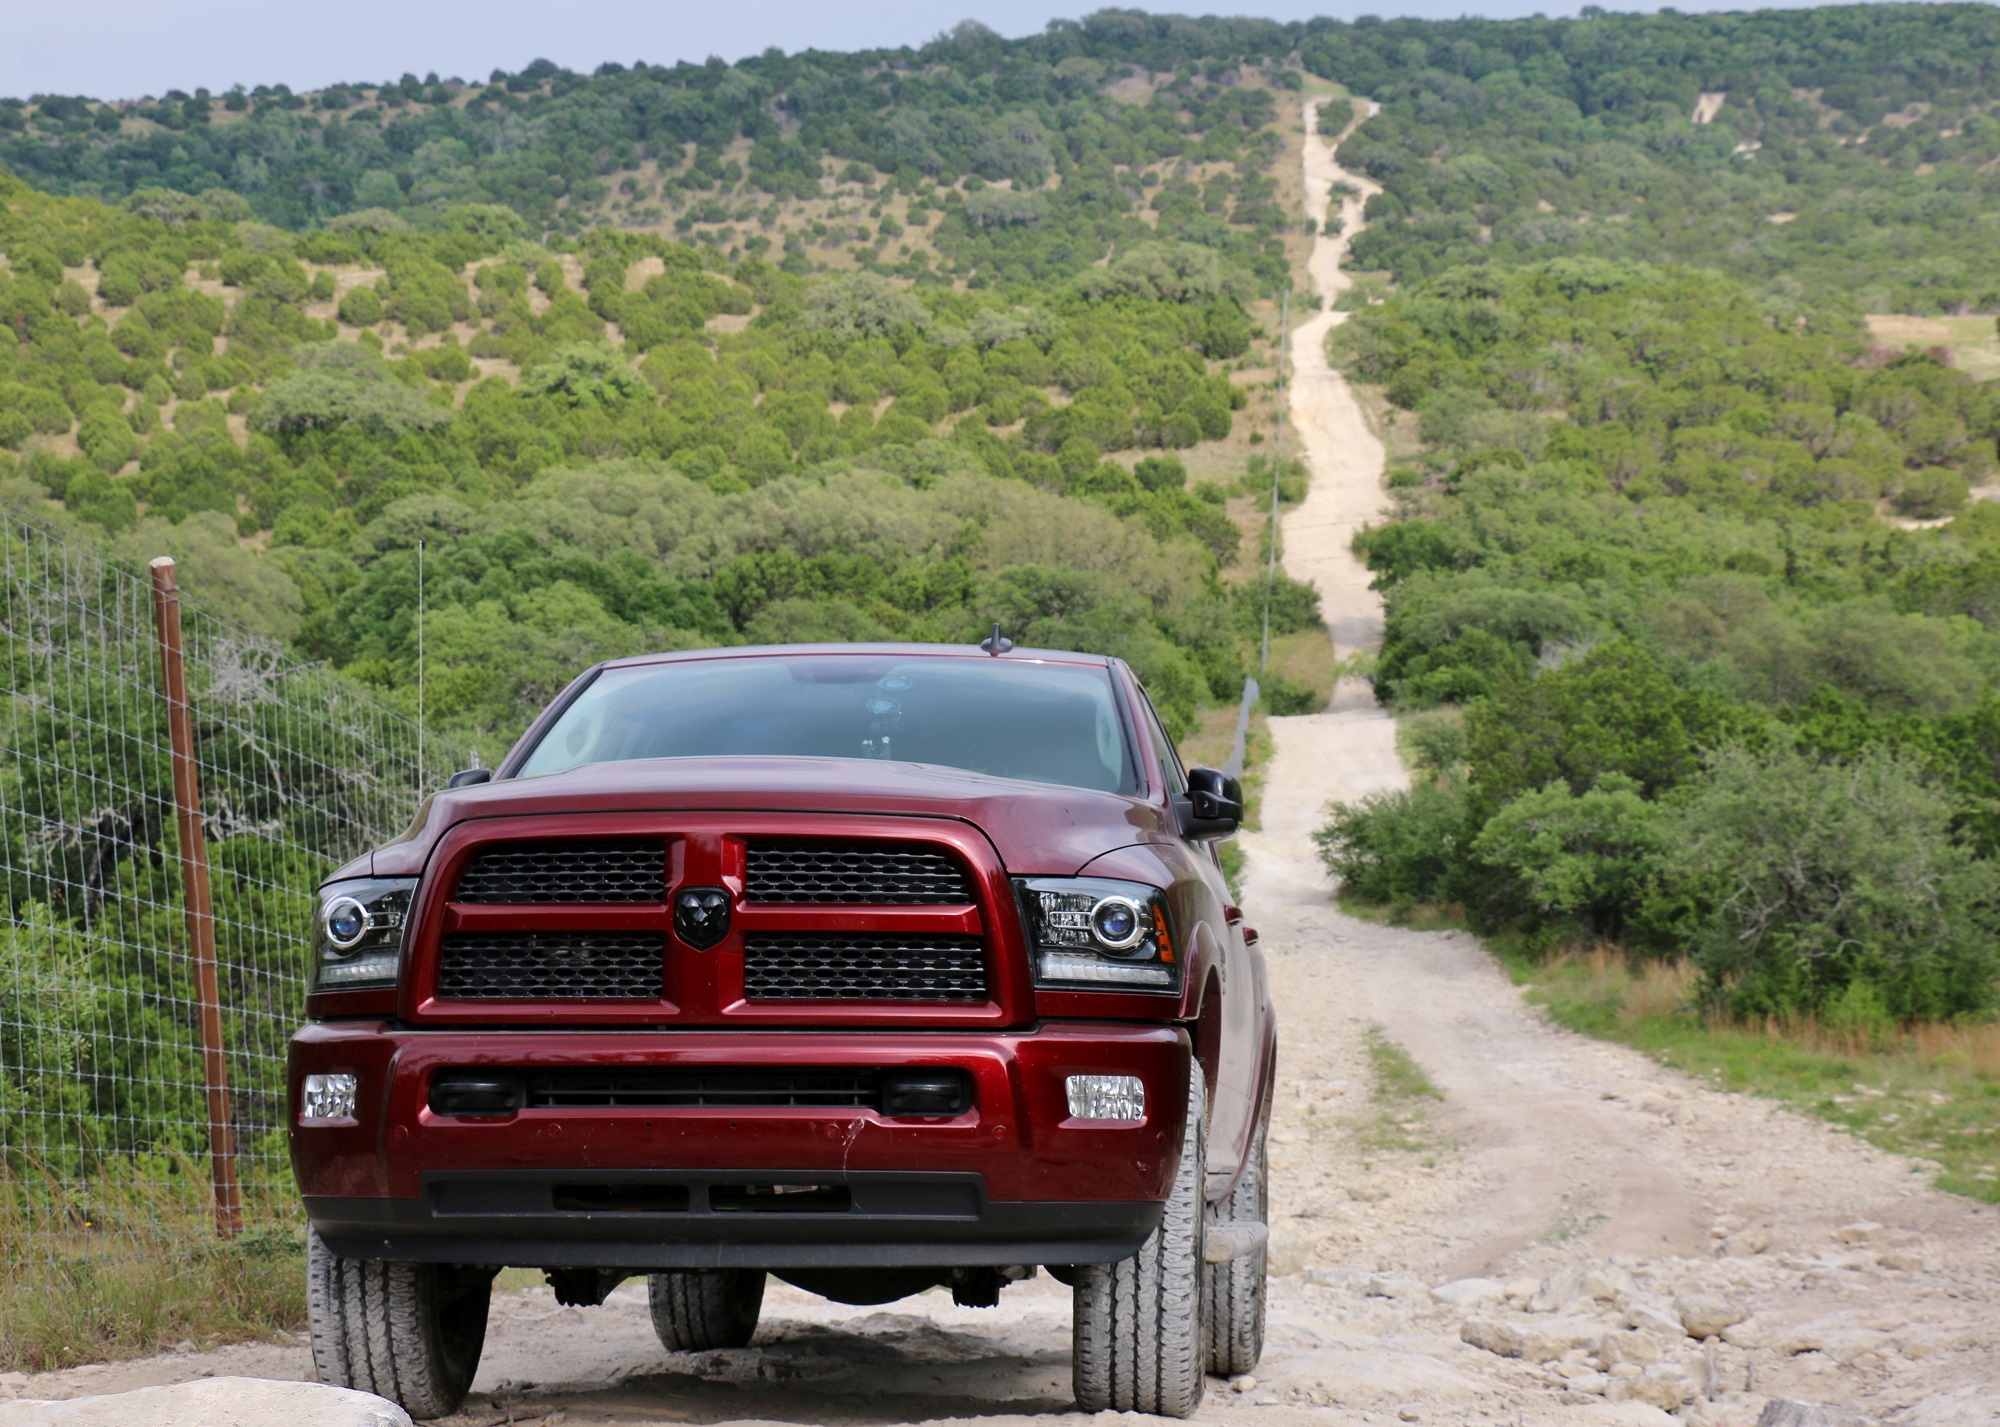 Dodge Forum Review: 2017 Ram 2500 Laramie with the 4x4 Off-road Package